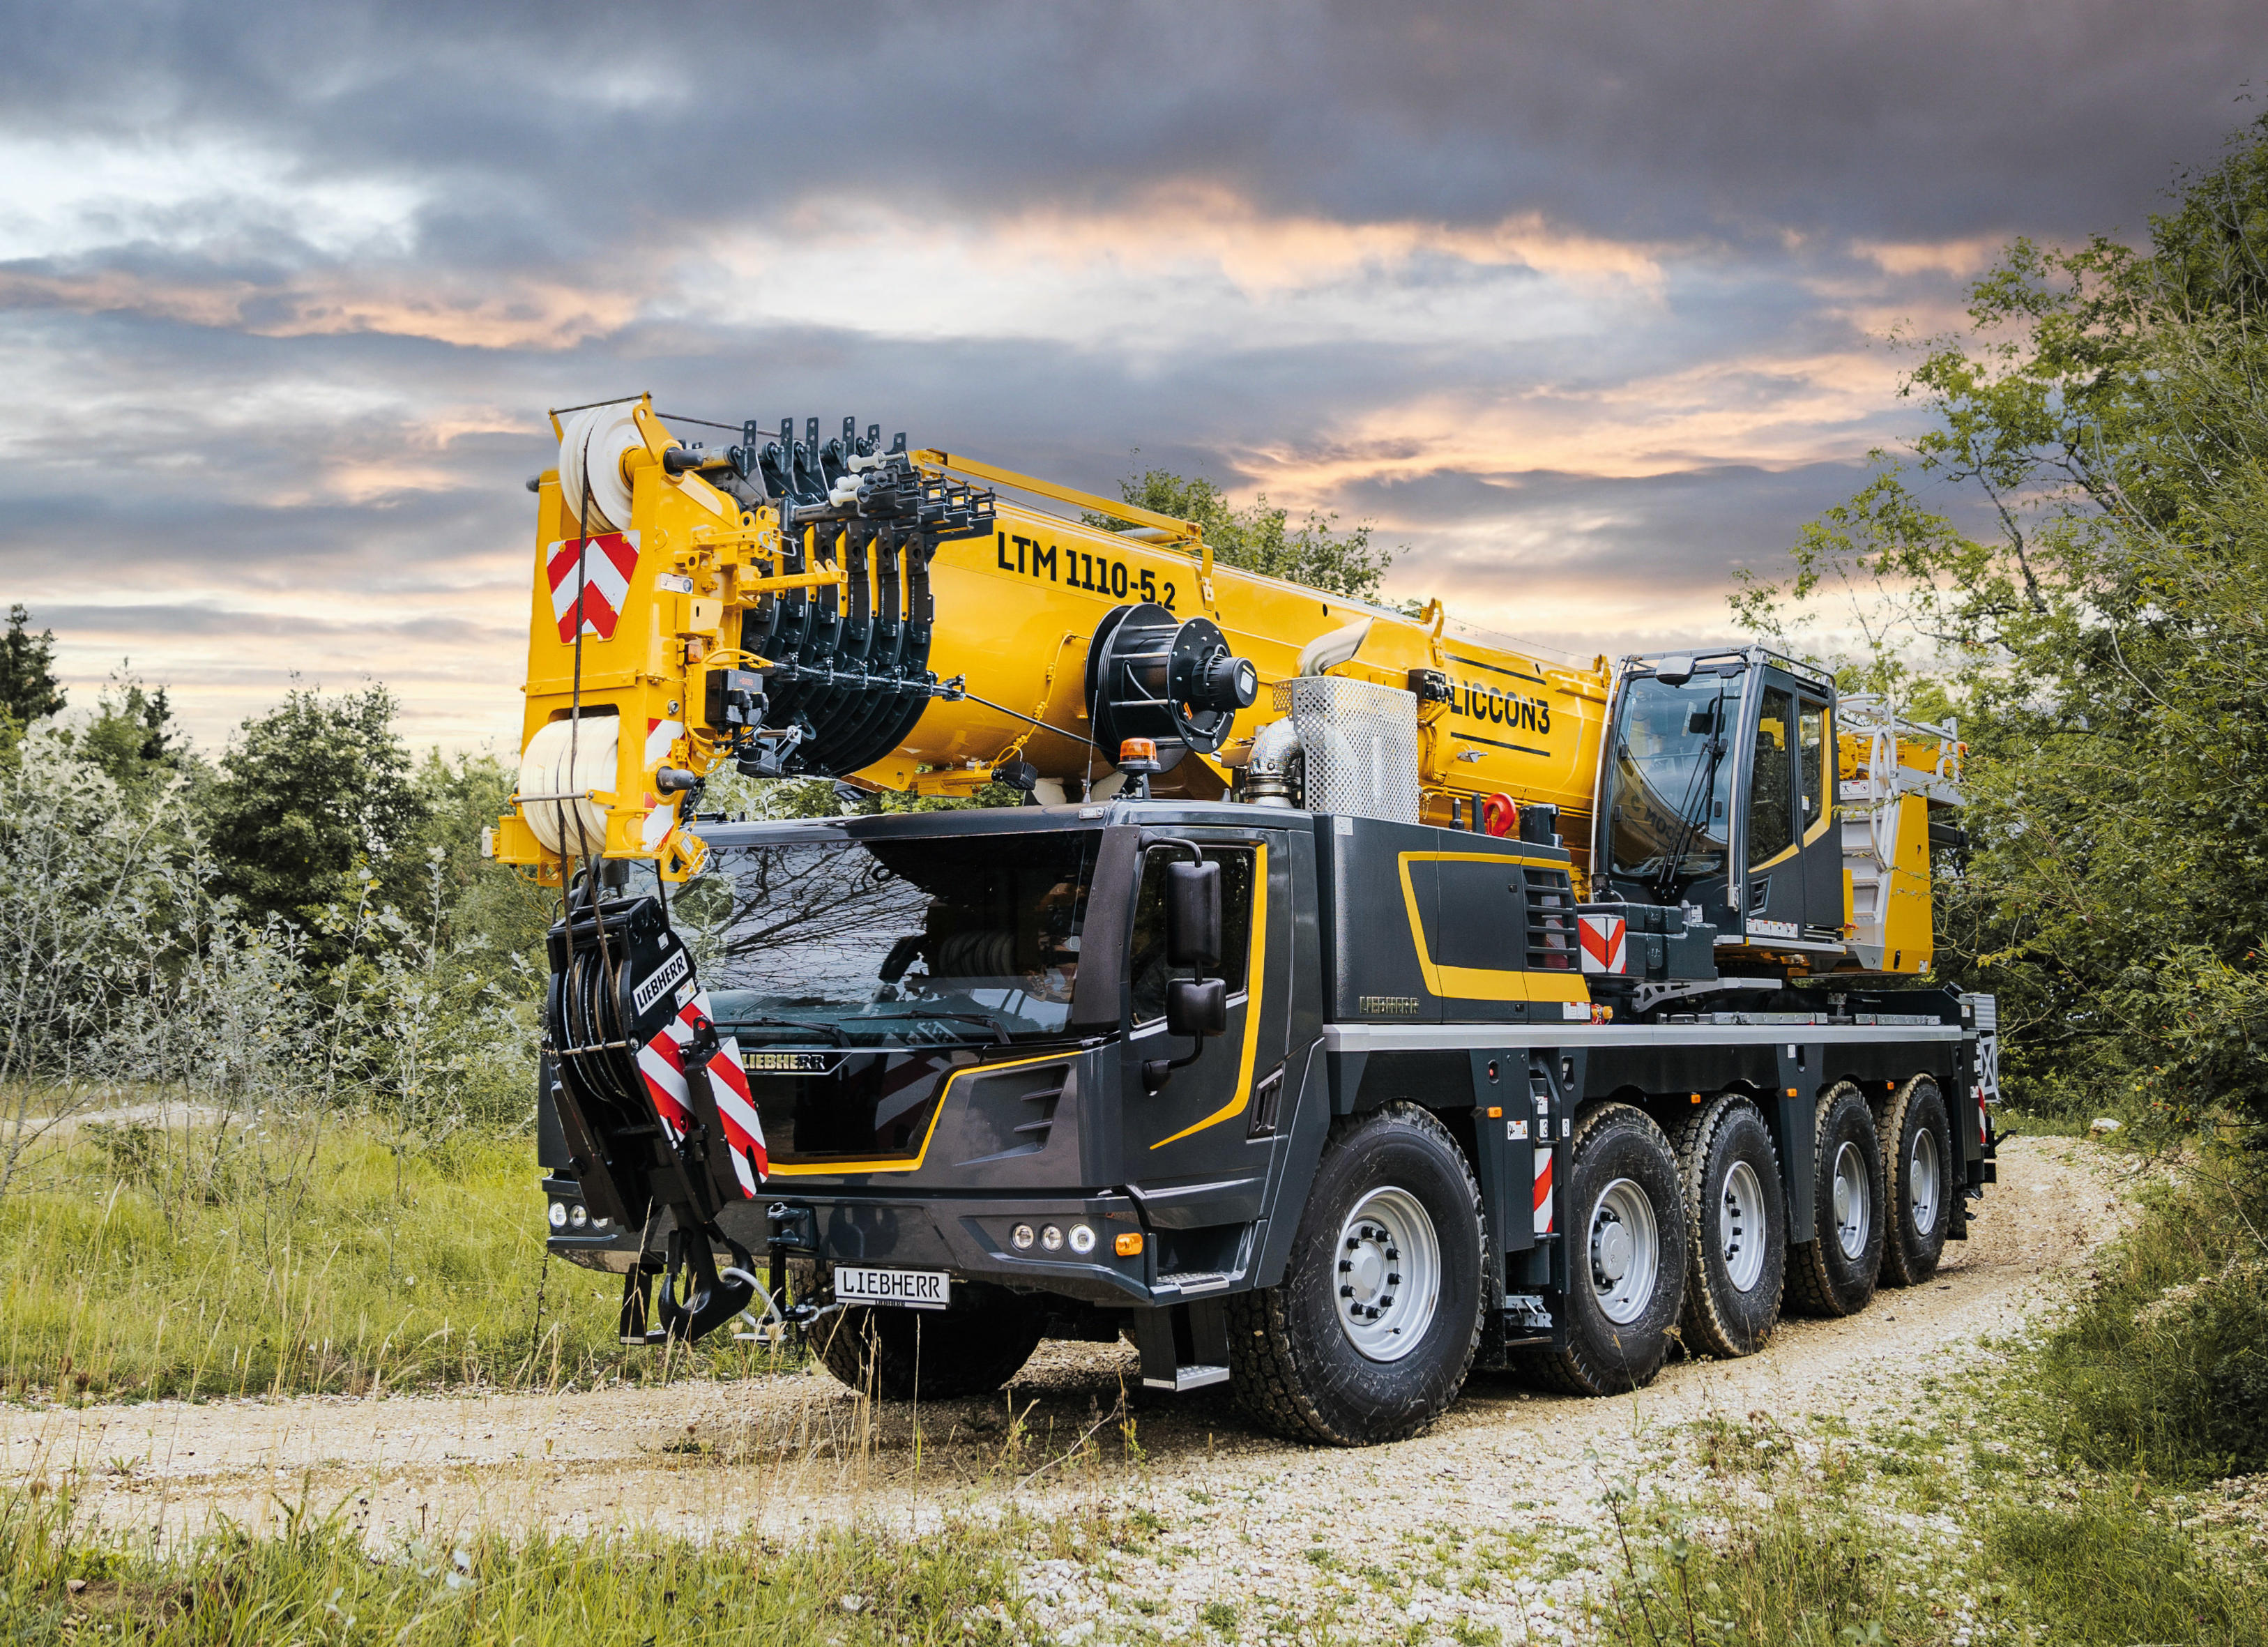 New design – the Liebherr LTM 1110-5.2 mobile crane features the very latest crane technology with a new look.